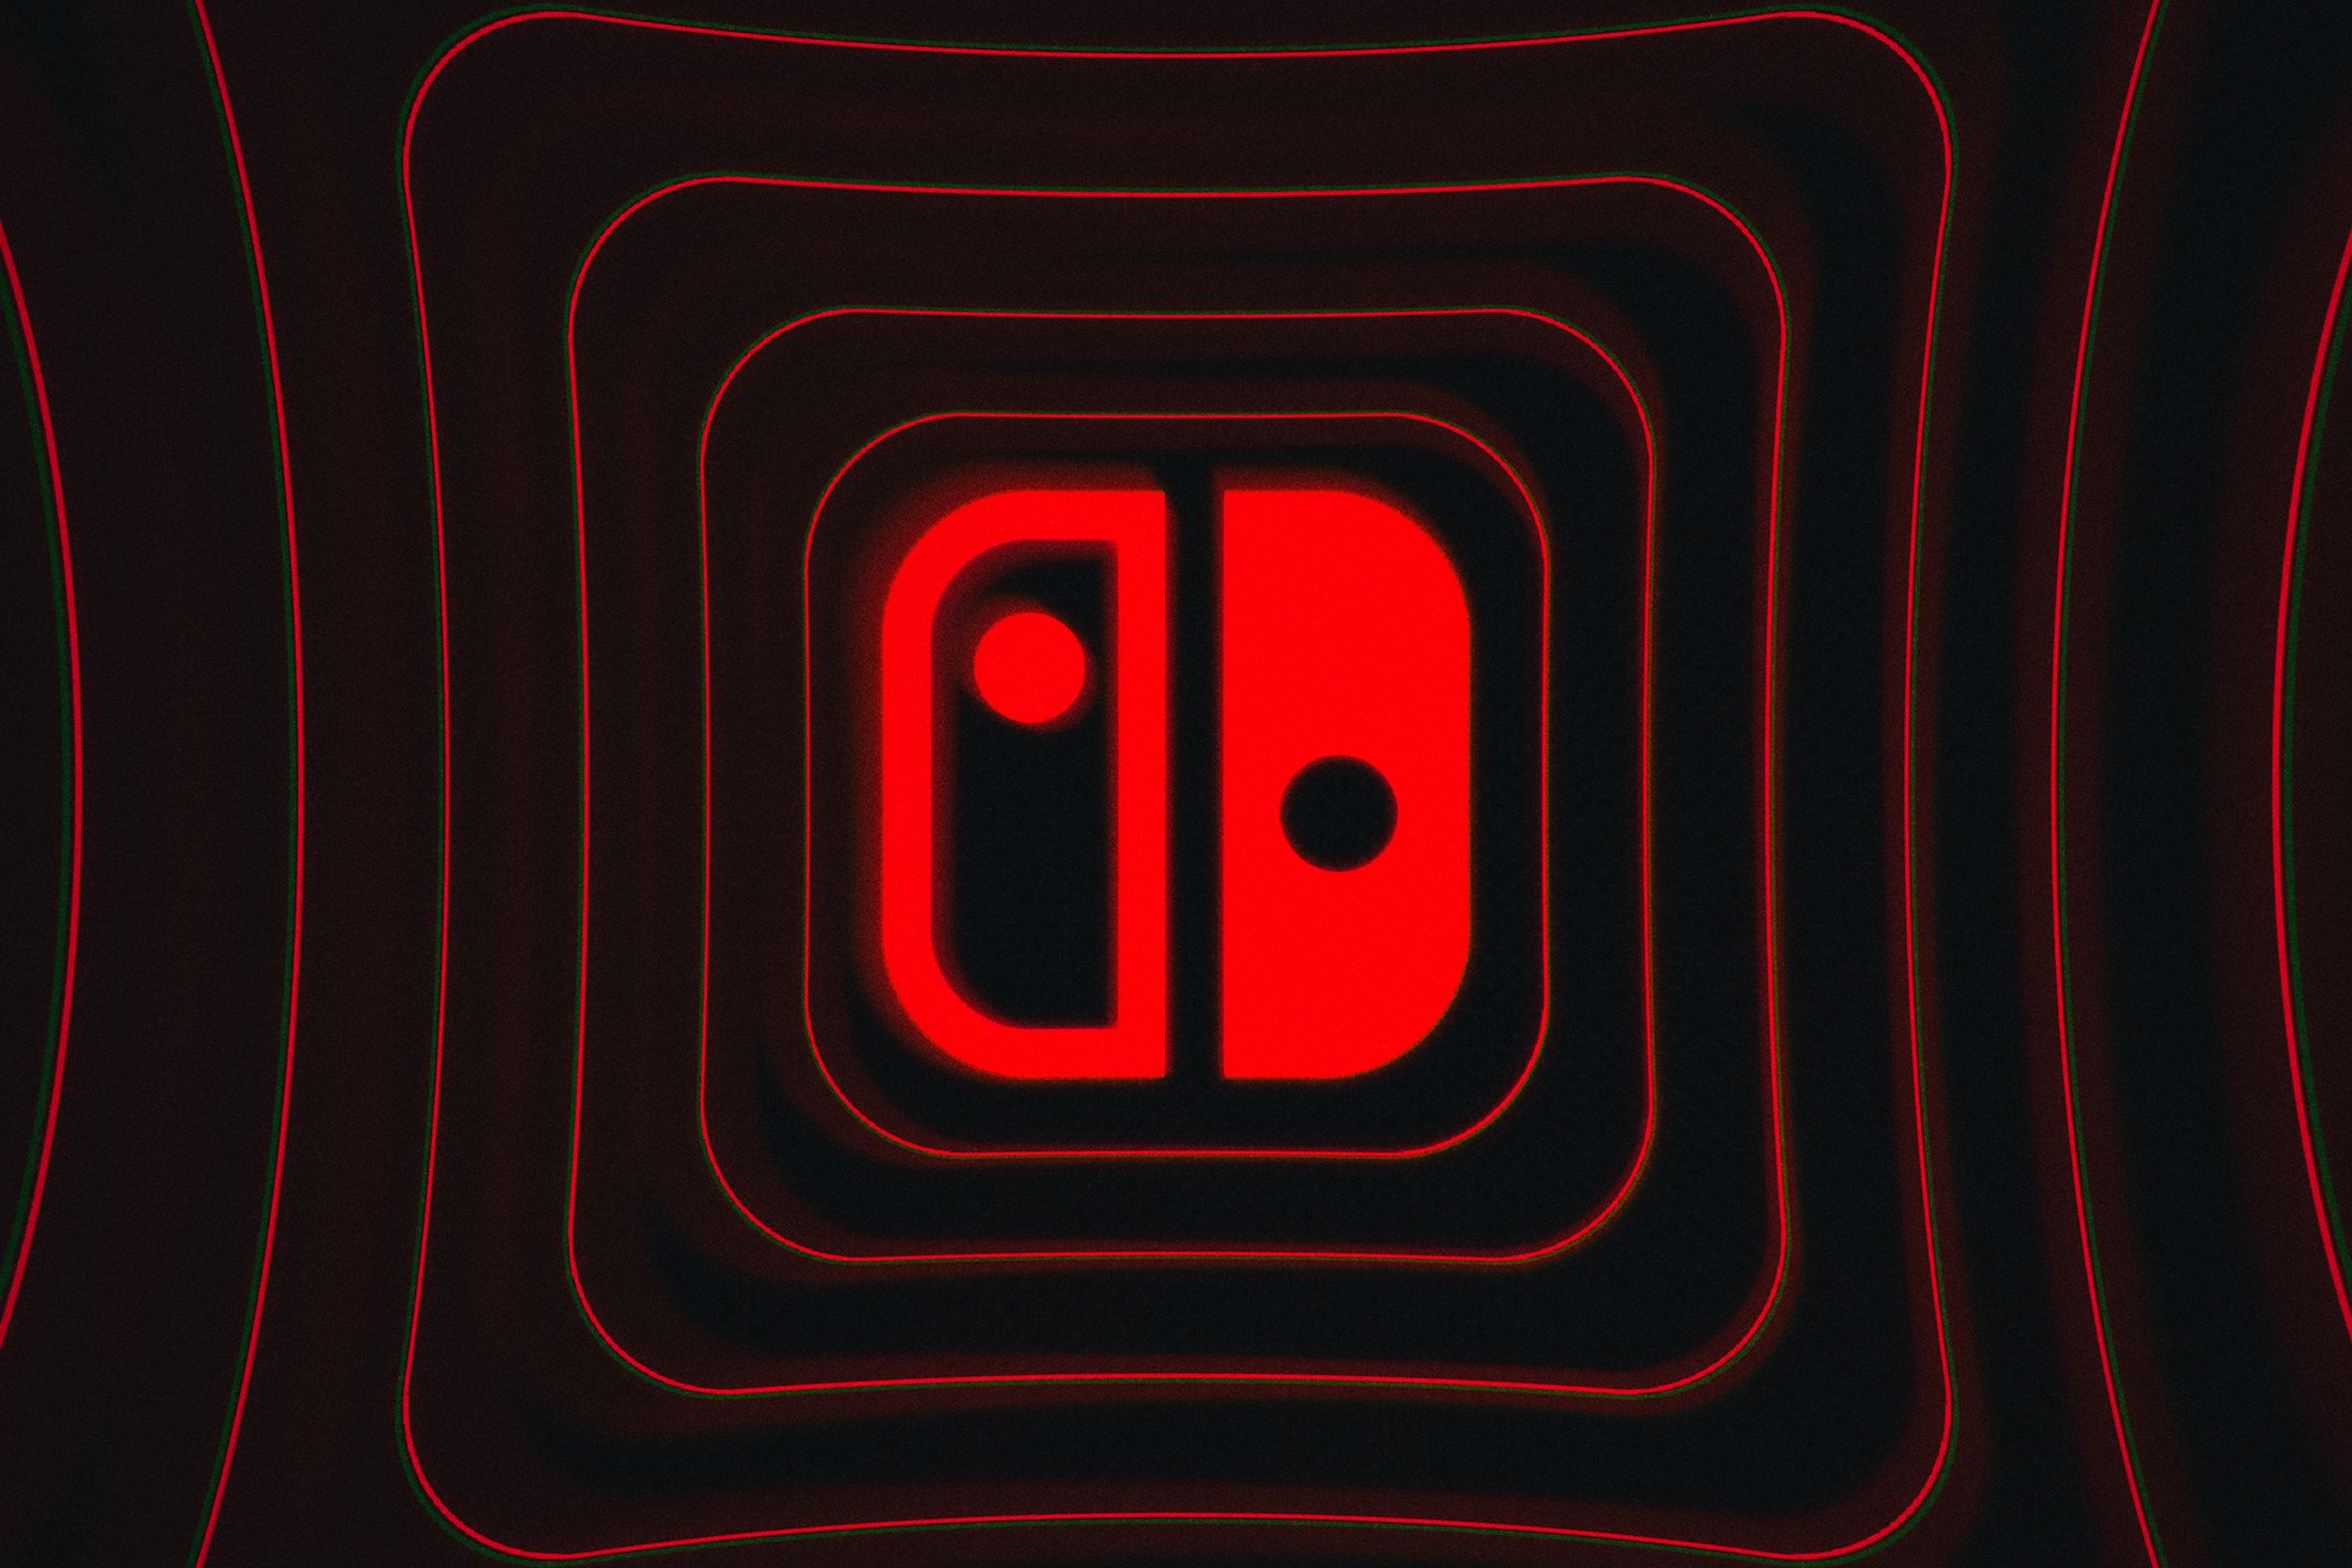 The Nintendo Switch logo on a black background with waves of thin red concentric rounded squares around it.